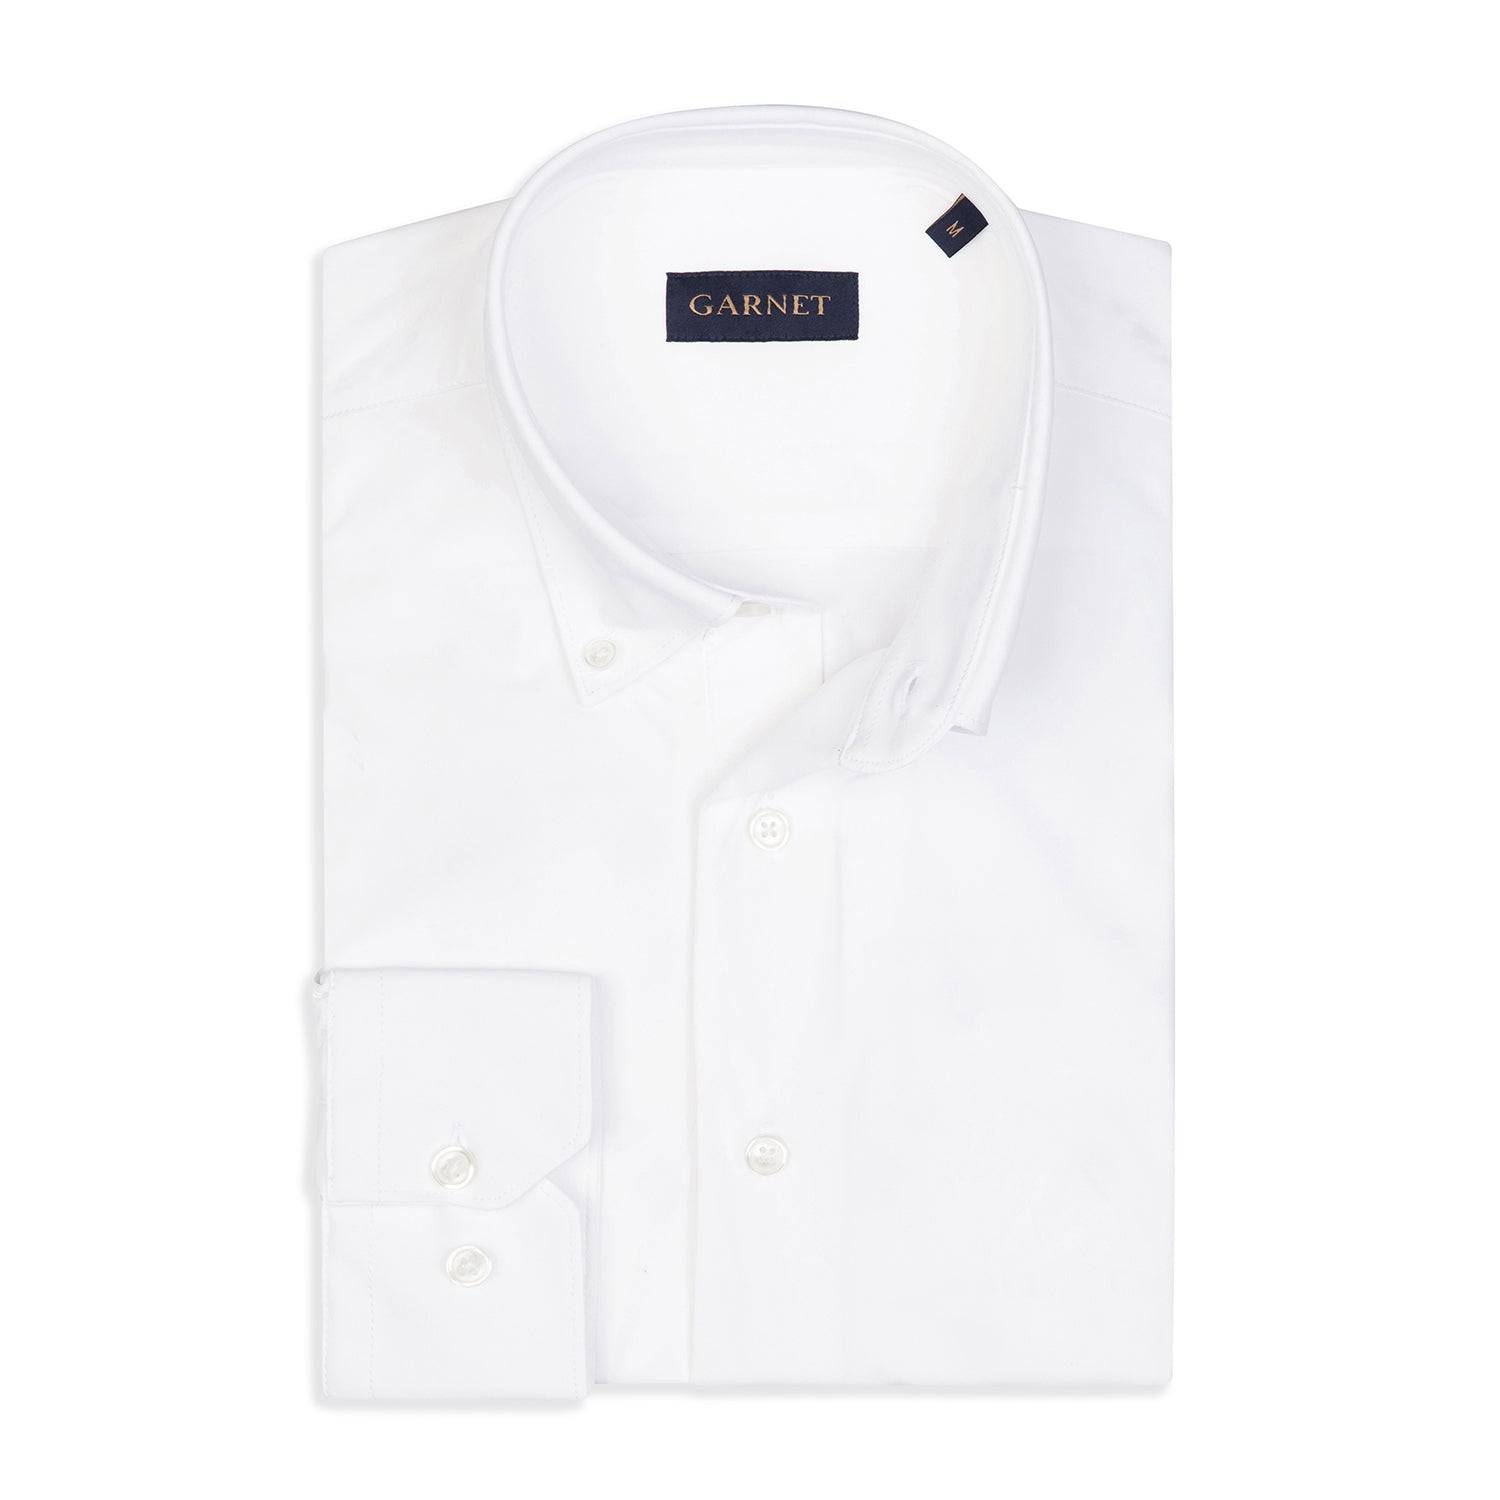 Solid B-Tech Shirt in White